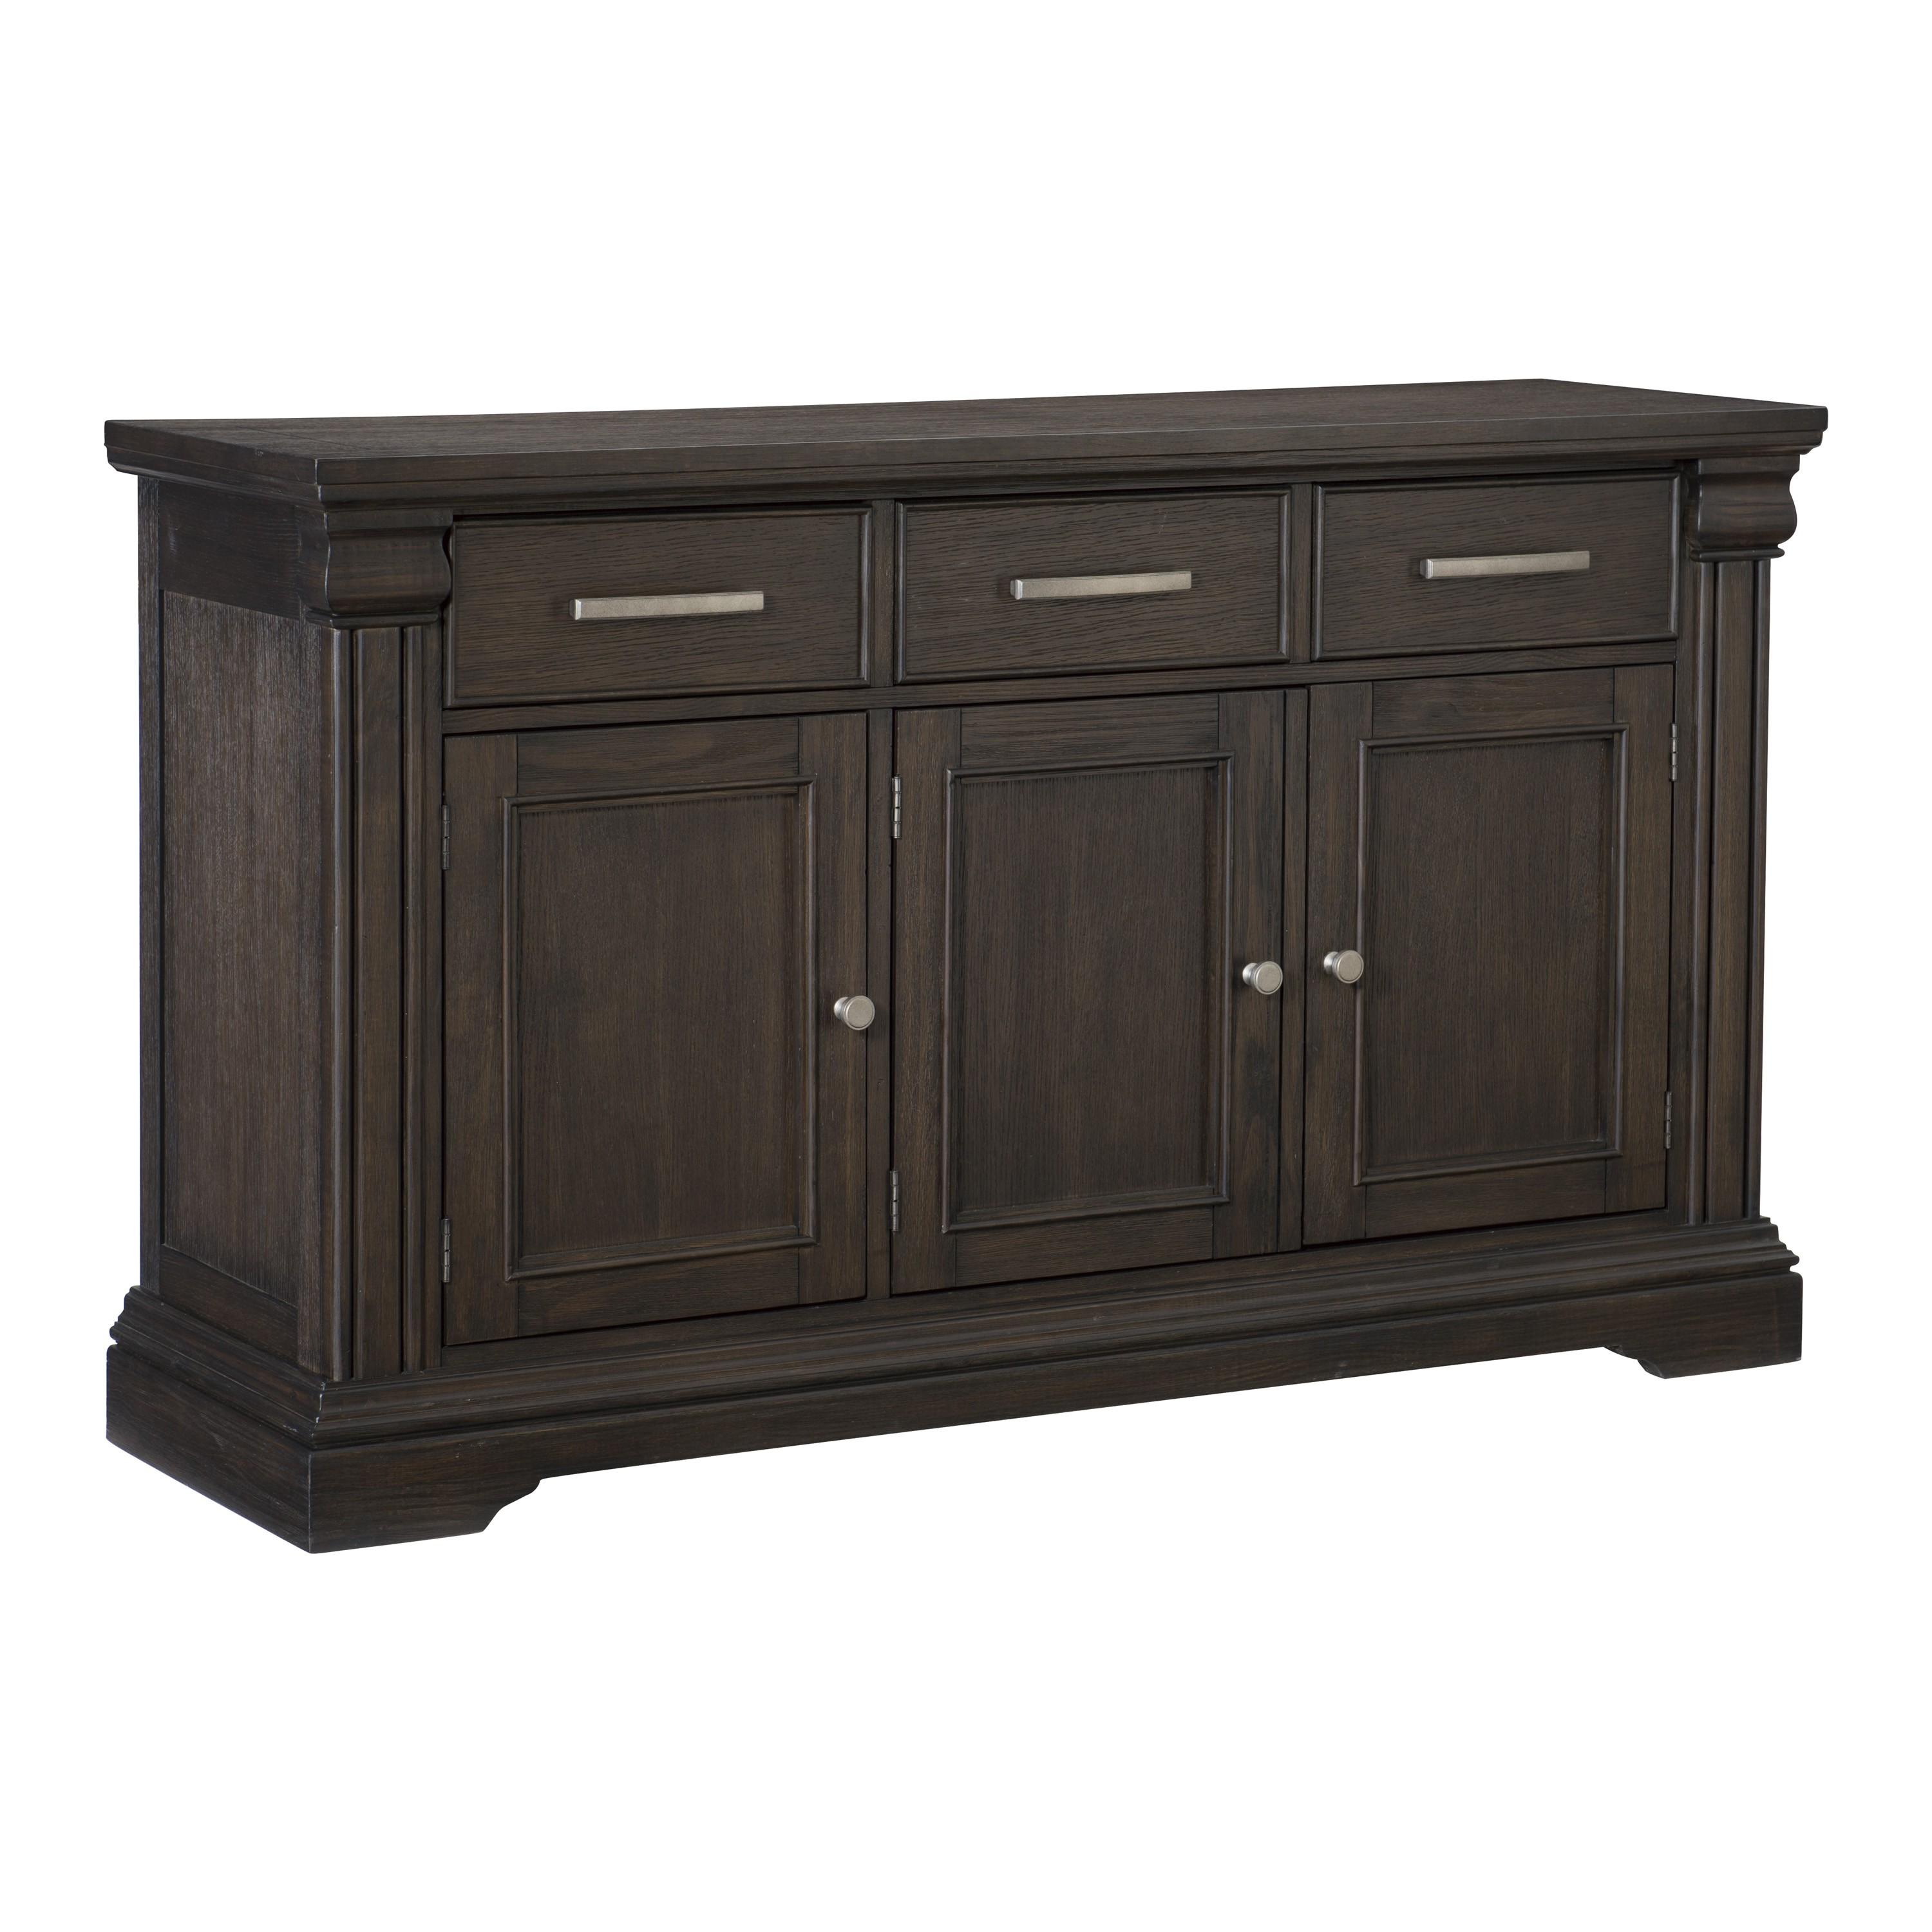 Traditional Server 5741-40 Southlake 5741-40 in Rustic Brown 